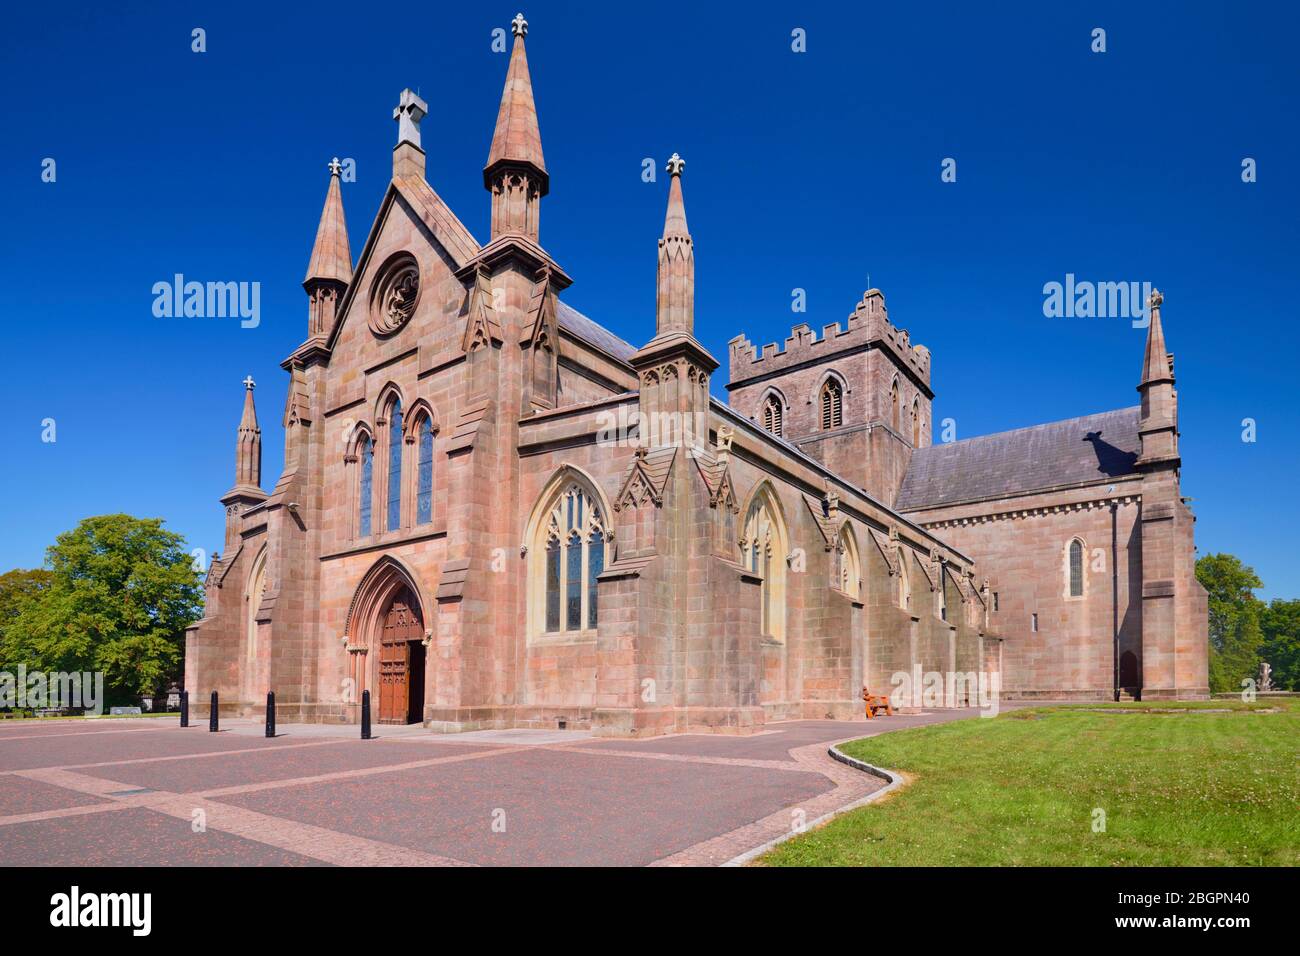 Ireland, County Armagh, Armagh, St Patrick's Church of Ireland Cathedral., view of the facade. Stock Photo